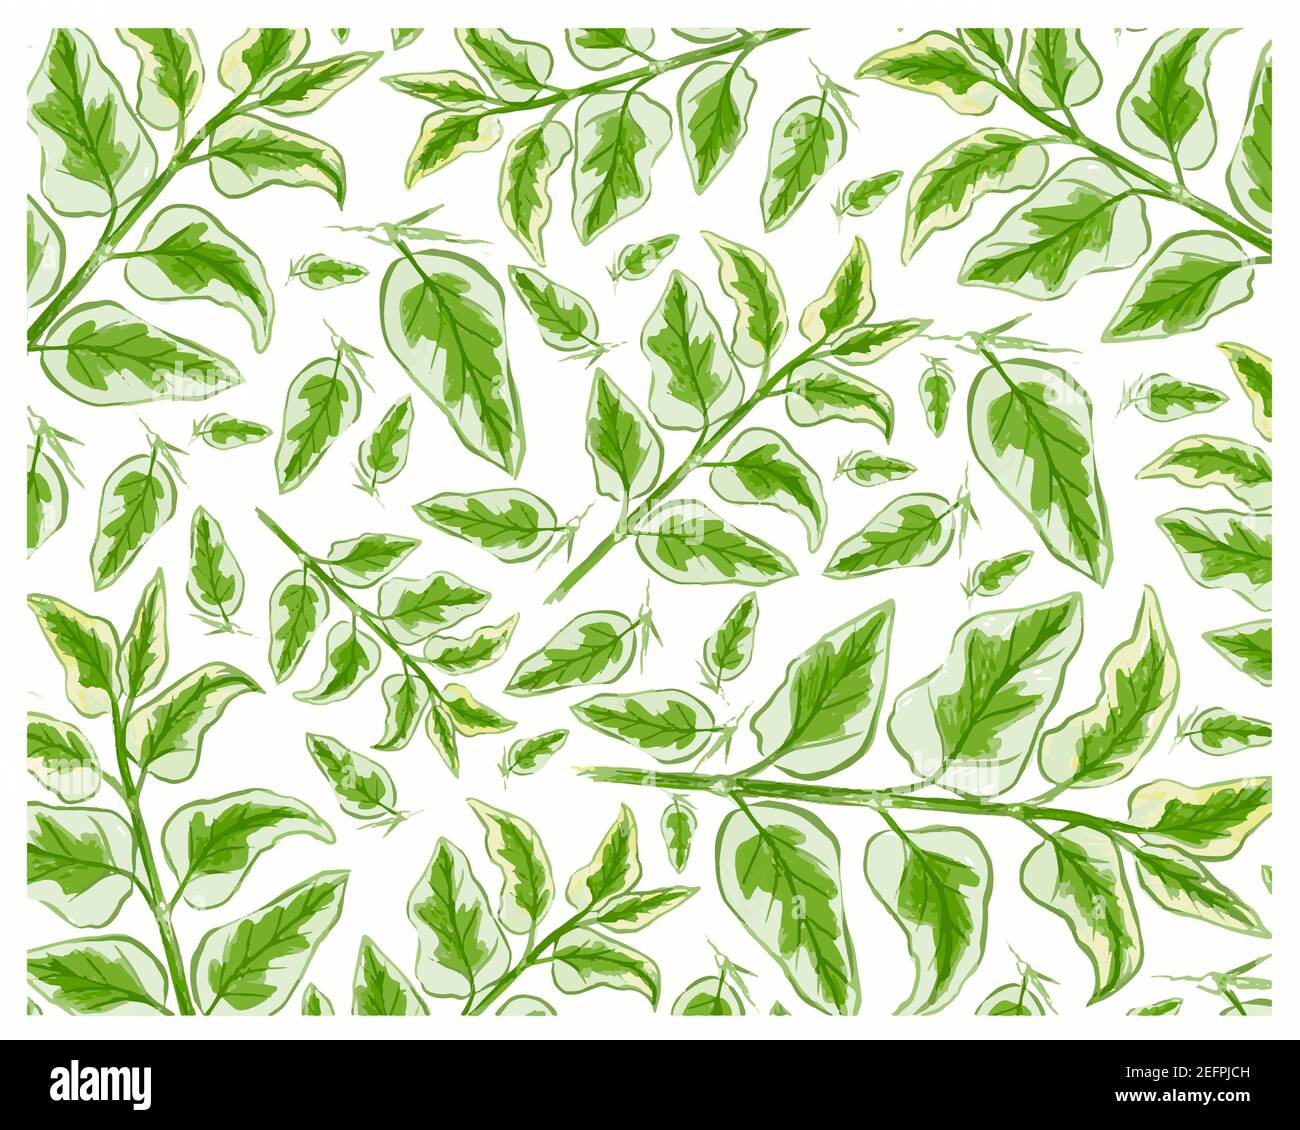 Ecological Concept, Illustration Background of Asystasia Gangetica, Chinese Violet, Coromandel, Creeping Foxglove or Asystasia Leaves. Stock Photo